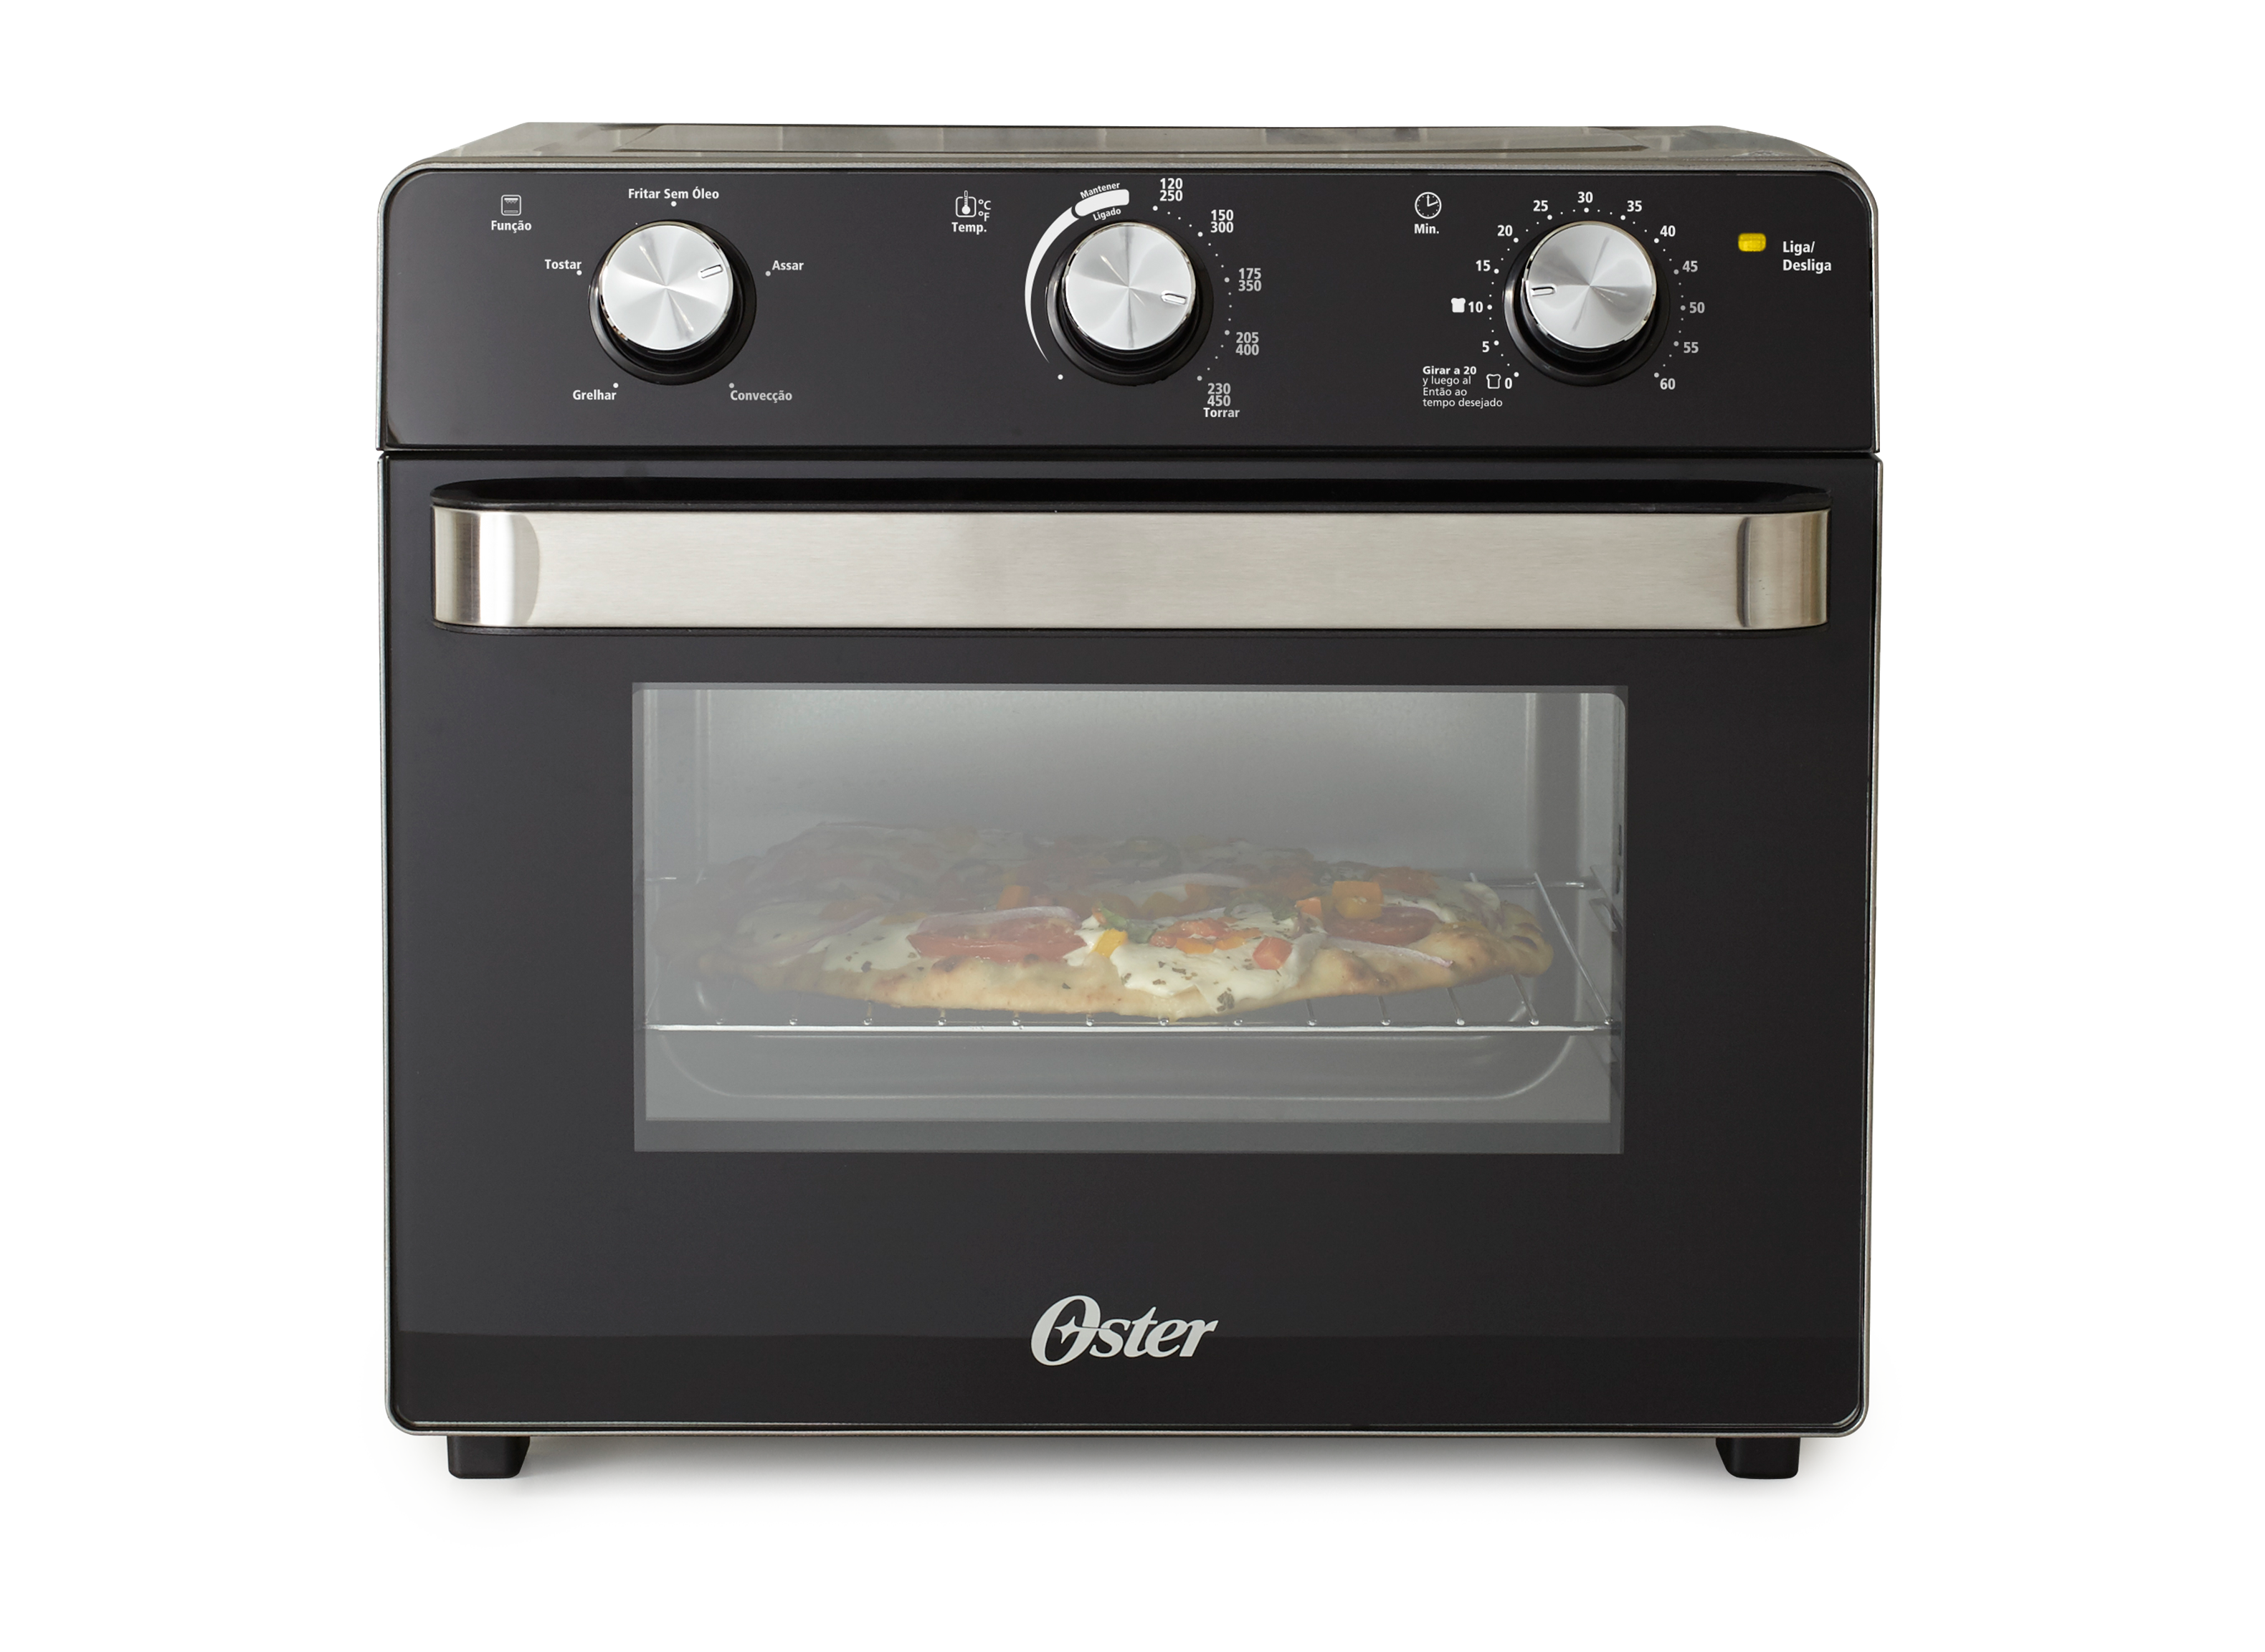 Oster Countertop Toaster Oven with Air Fryer TSSTTVMAF1 Toaster